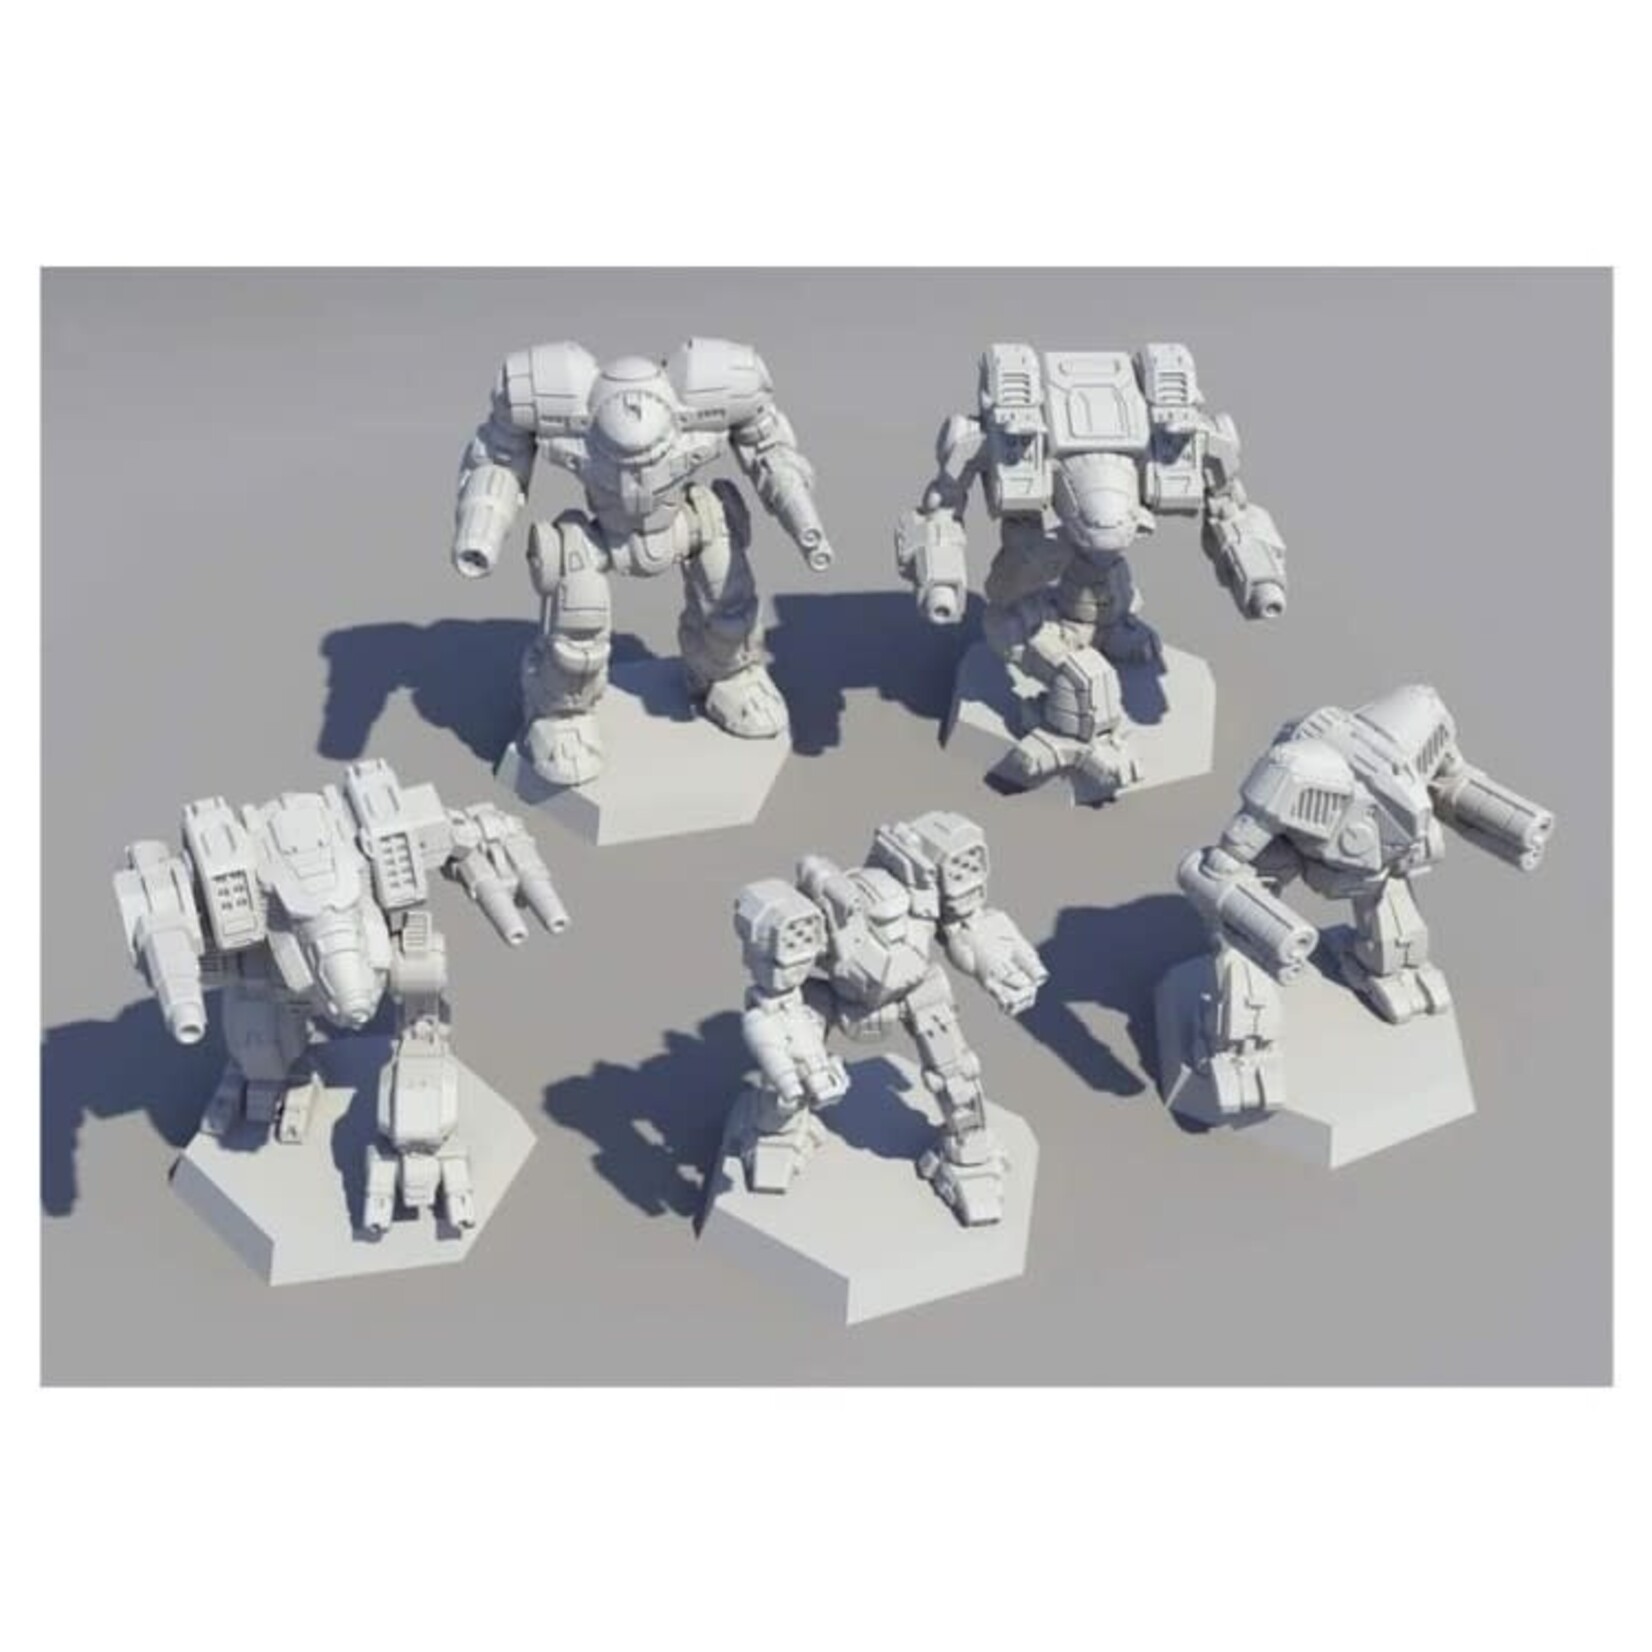 Catalyst Game Labs Battletech Miniature Force Pack Clan Support Star